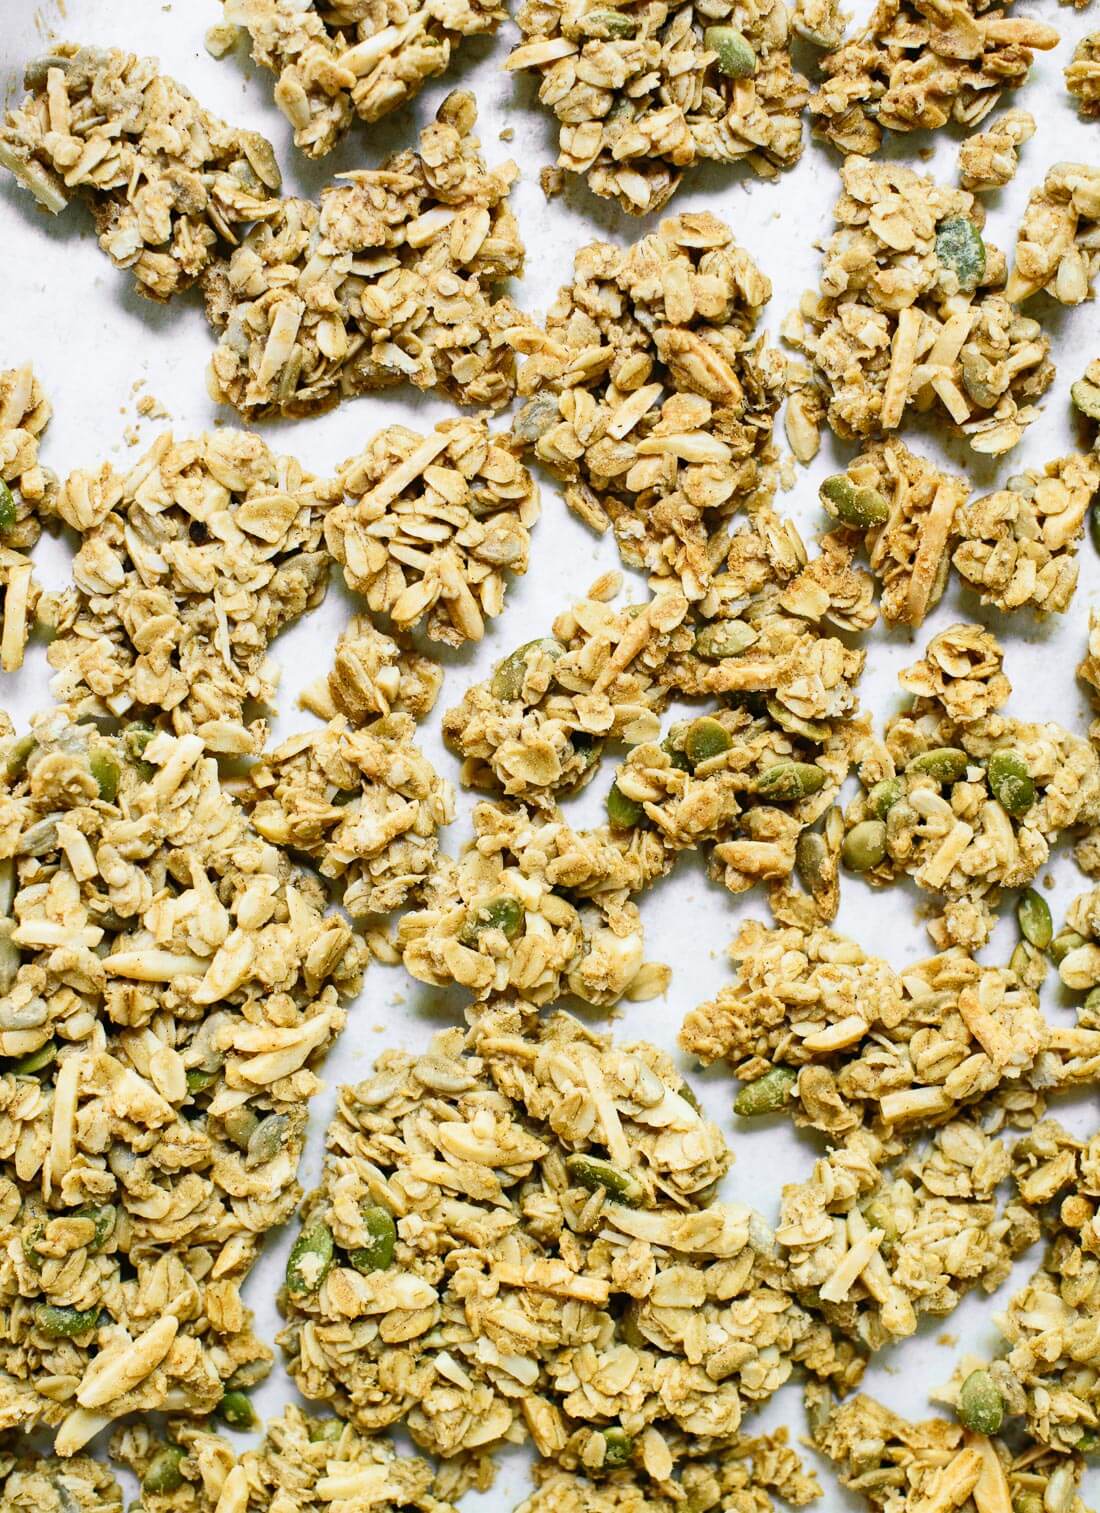 Learn the trick to making extra clumpy granola! cookieandkate.com